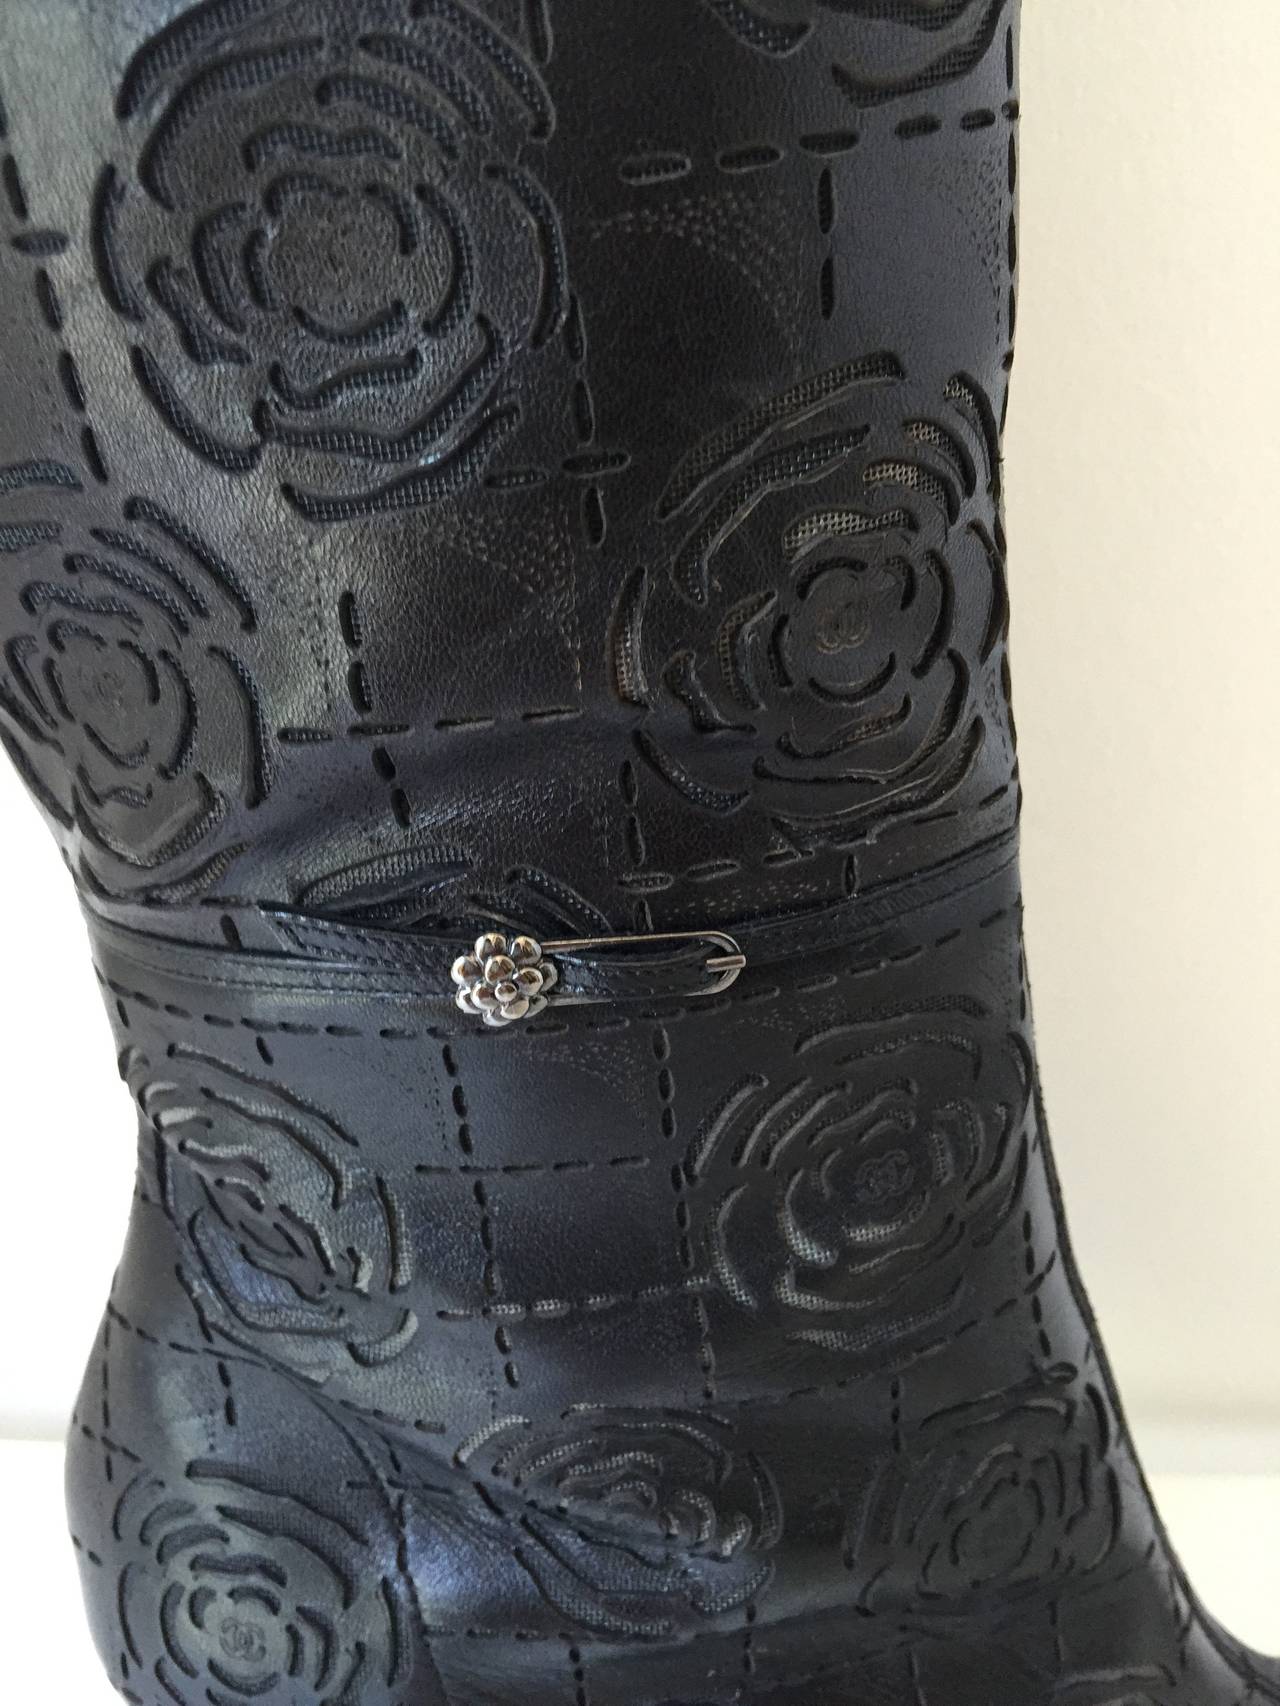 Boots with gorgeous details...leather with pointy toes...
camellia flowers embossed all throughout the boot ...side zipper
high stacked heels,,,,wear with a skirt or tucked into jeans....